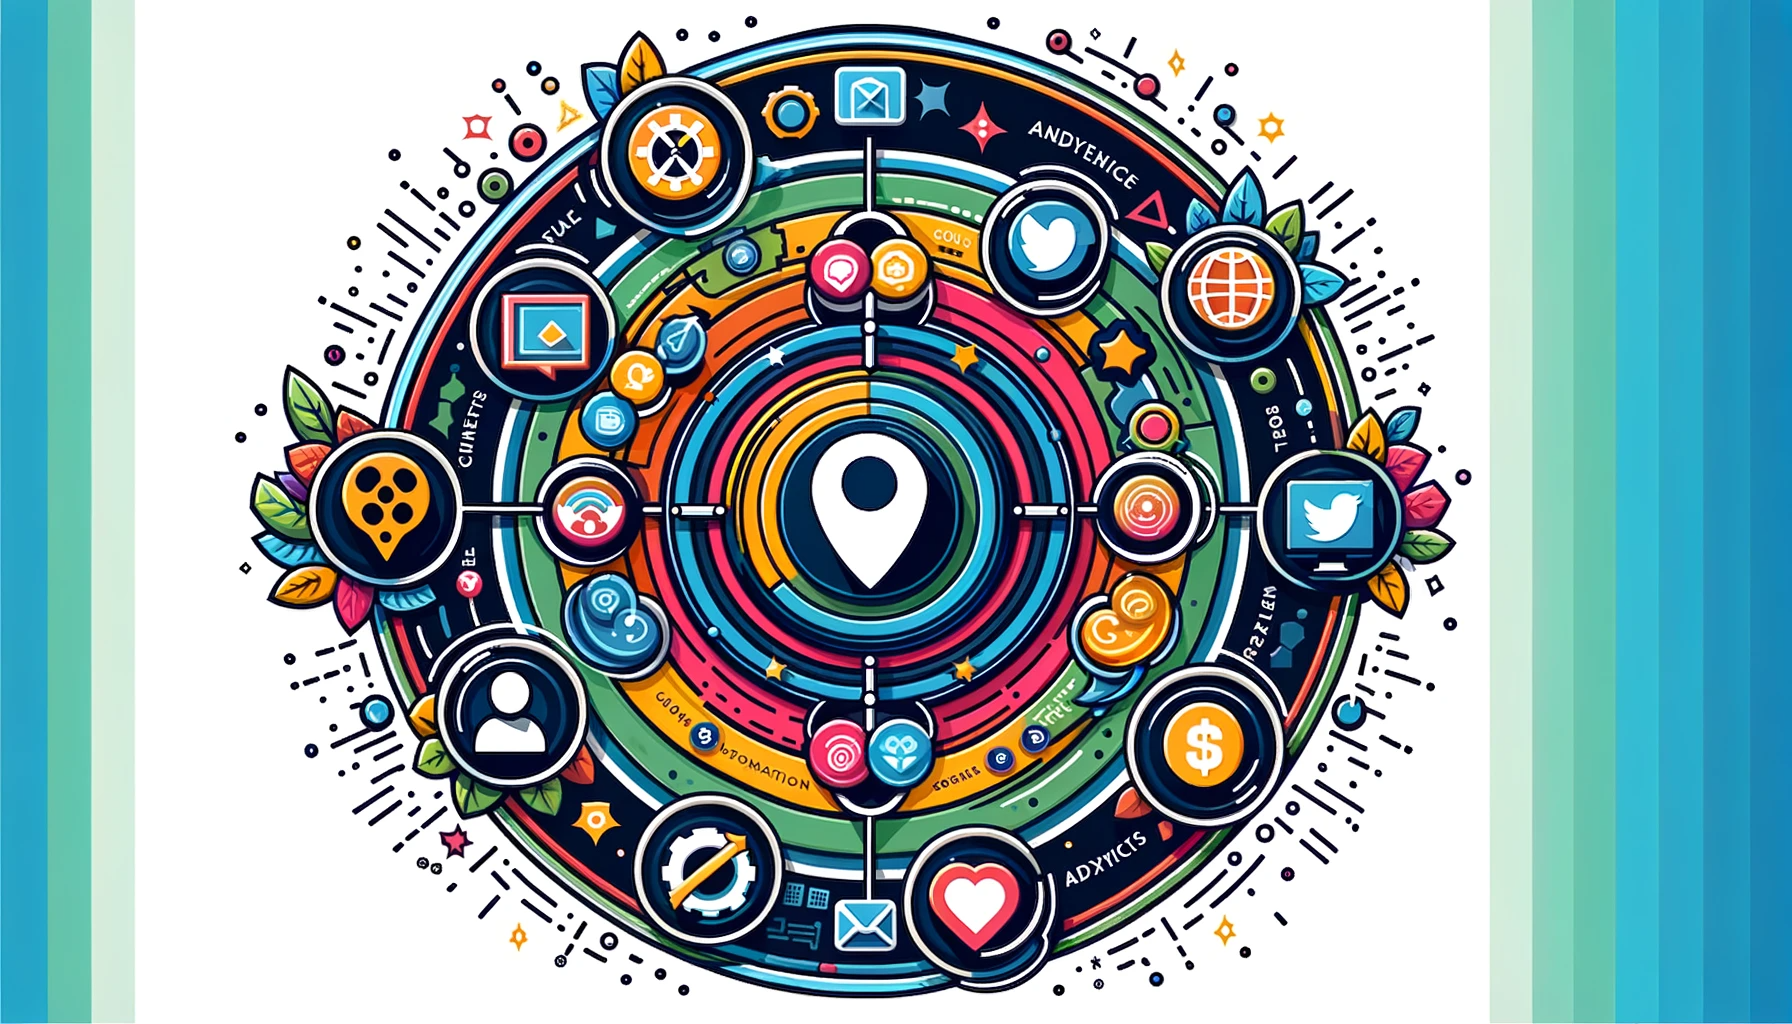 A vibrant illustration showcasing the components of a social media marketing strategy framework. Central to the image is a prominent social media icon, encircled by elements like content creation, audience engagement, analytics, and advertising. The design is colorful and dynamic, mirroring the energetic and diverse nature of social media marketing.